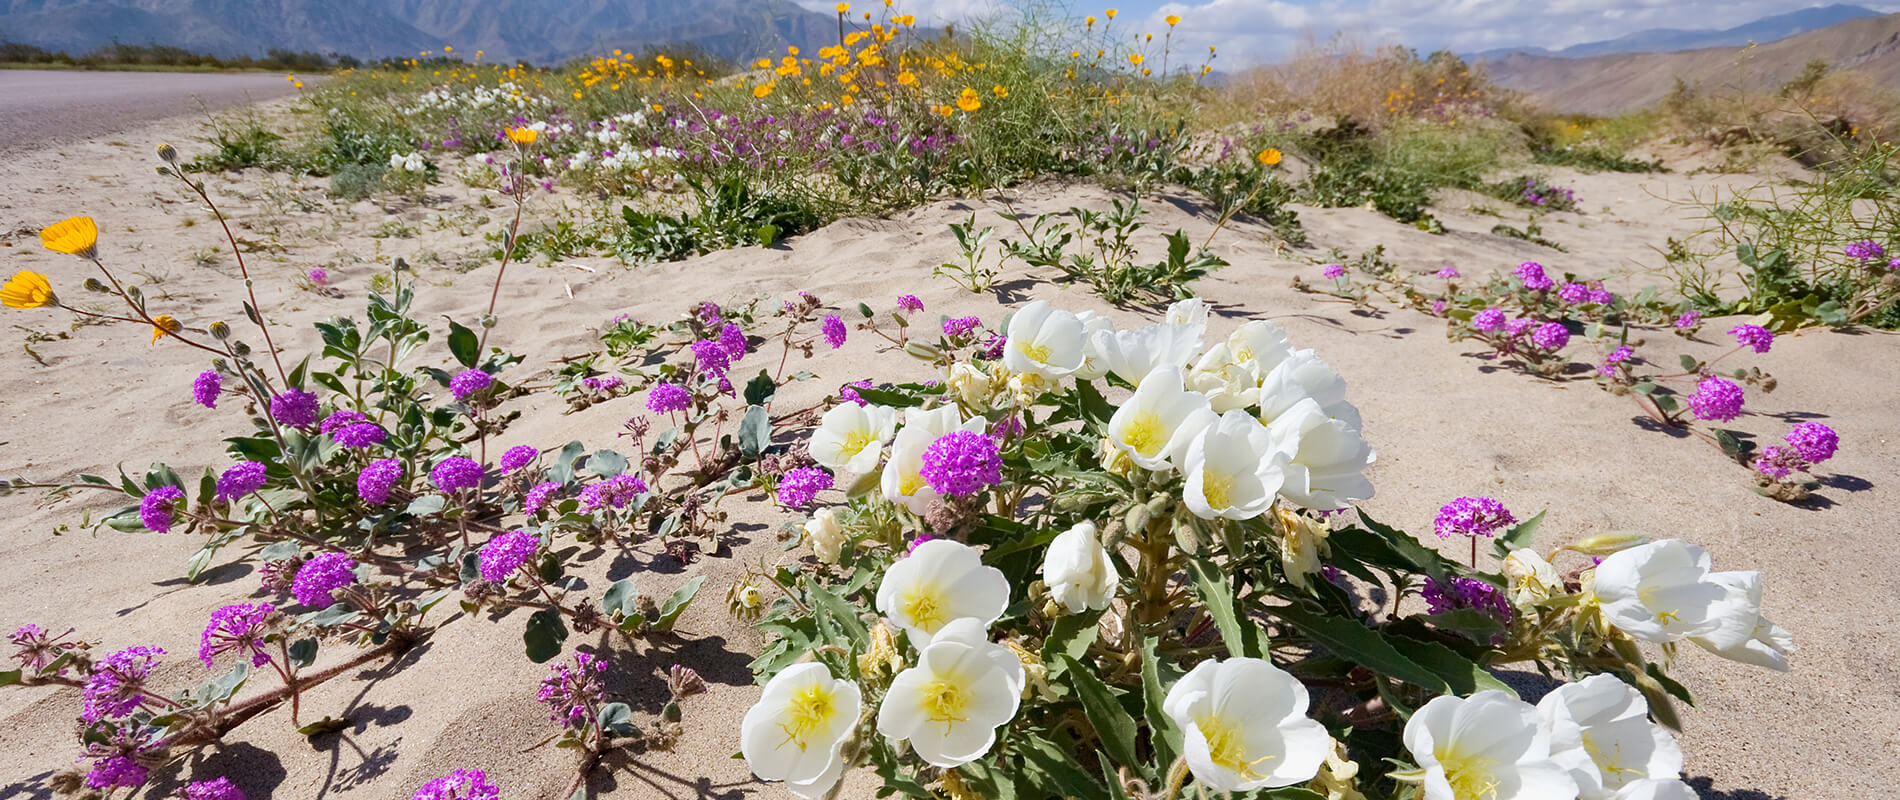 Anza-Borrego, the desert covered in a thousand colors